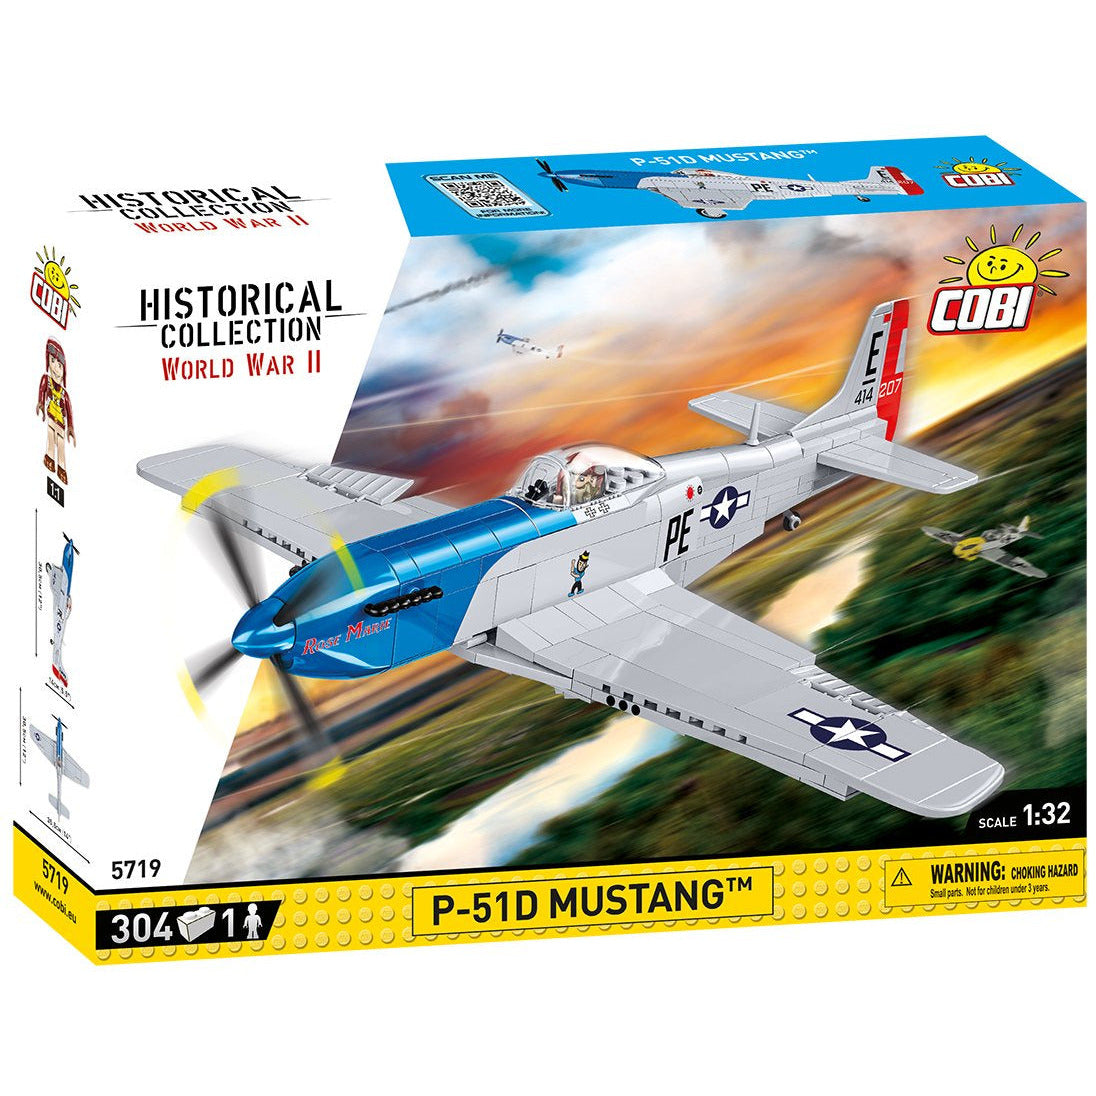 Historical Collection WWII: 5719 P-51d Mustang 304 PCS